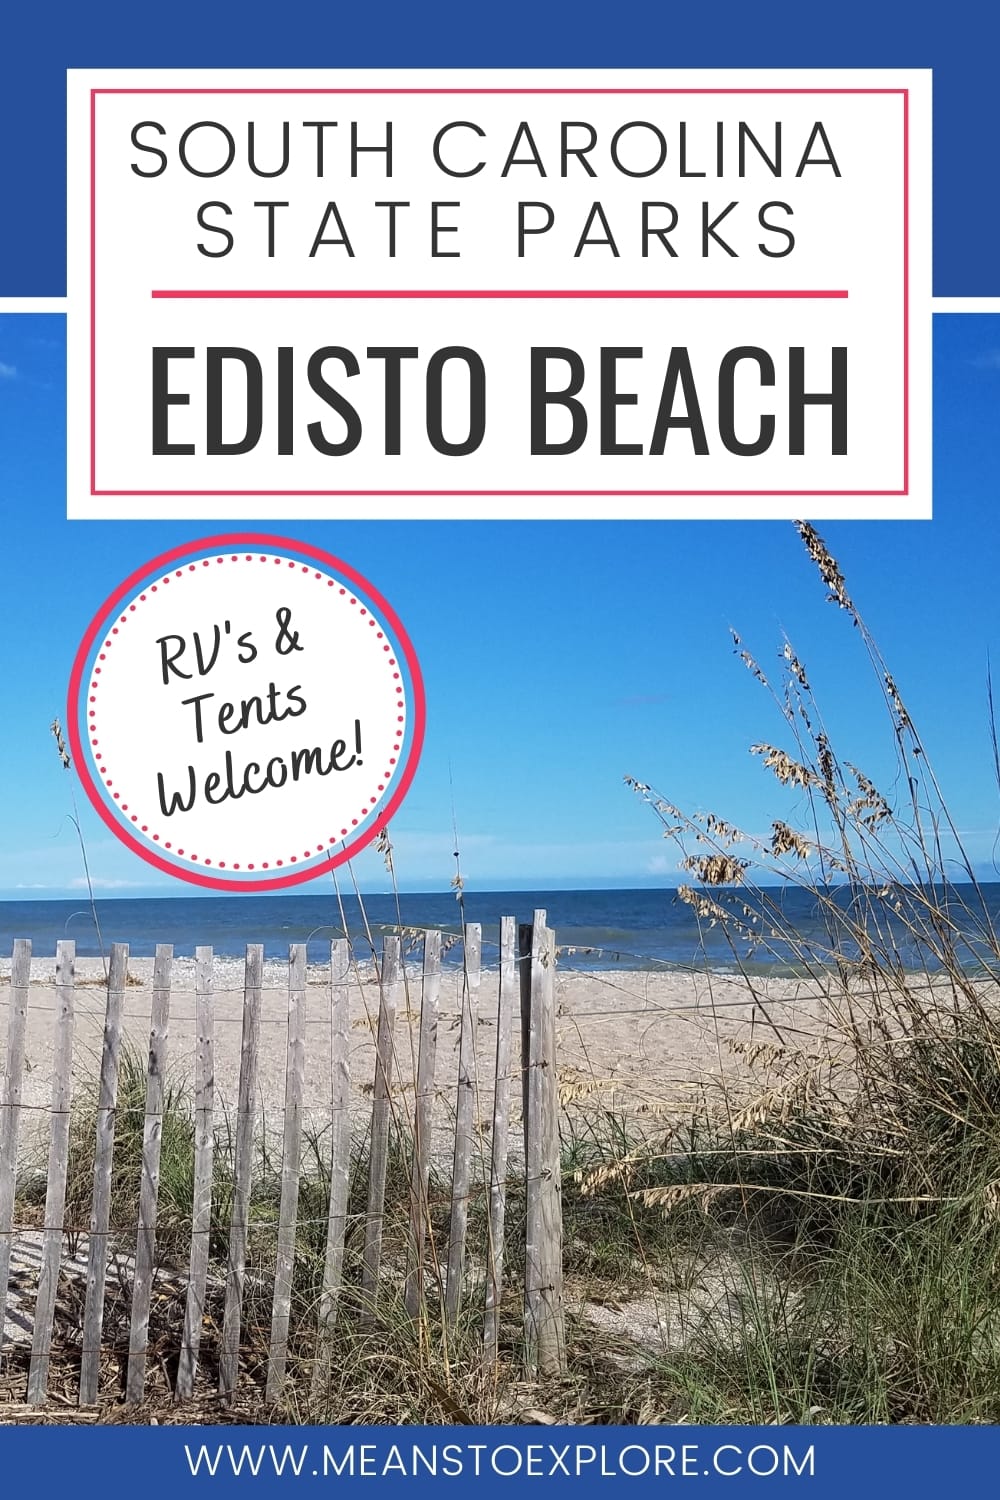 The Complete Guide to Edisto Beach State Park